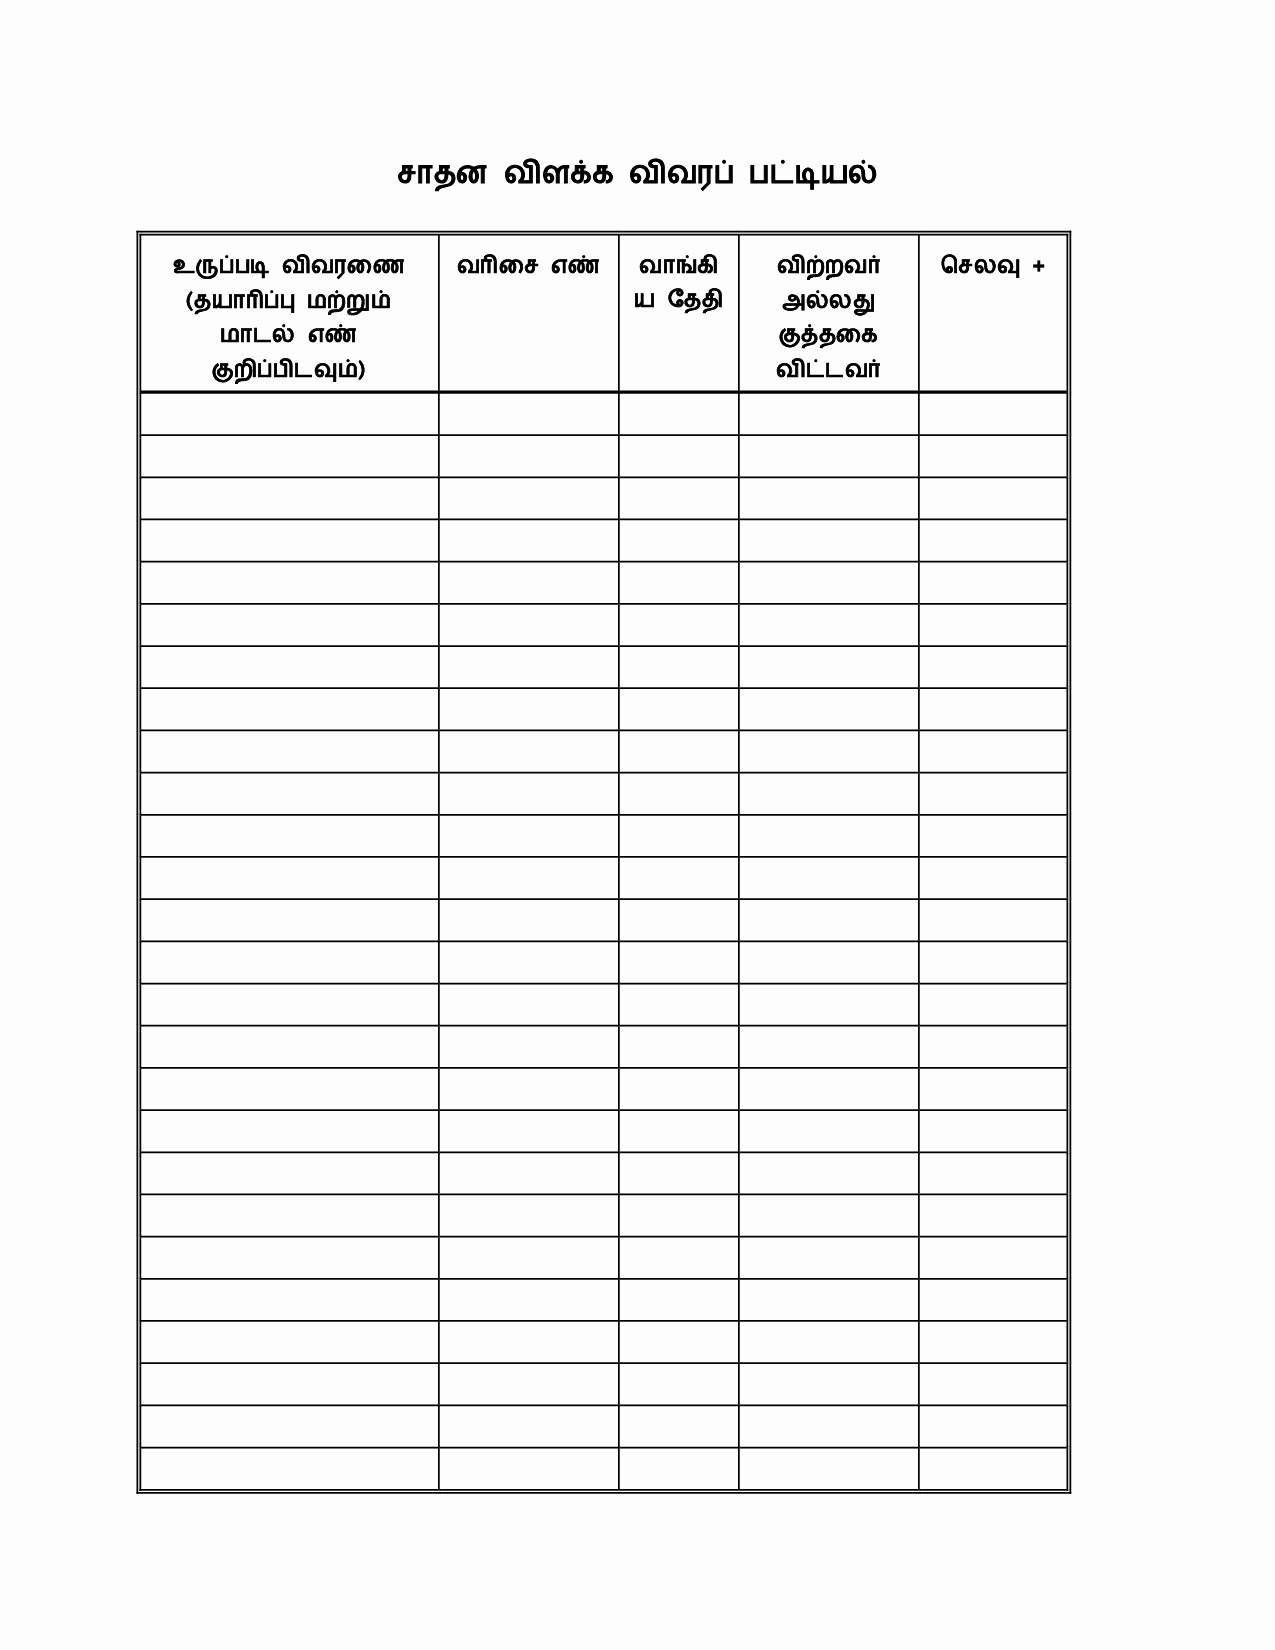 Office Supply Inventory List Template Unique Best S Of Fice Supply List Example Fice Supply